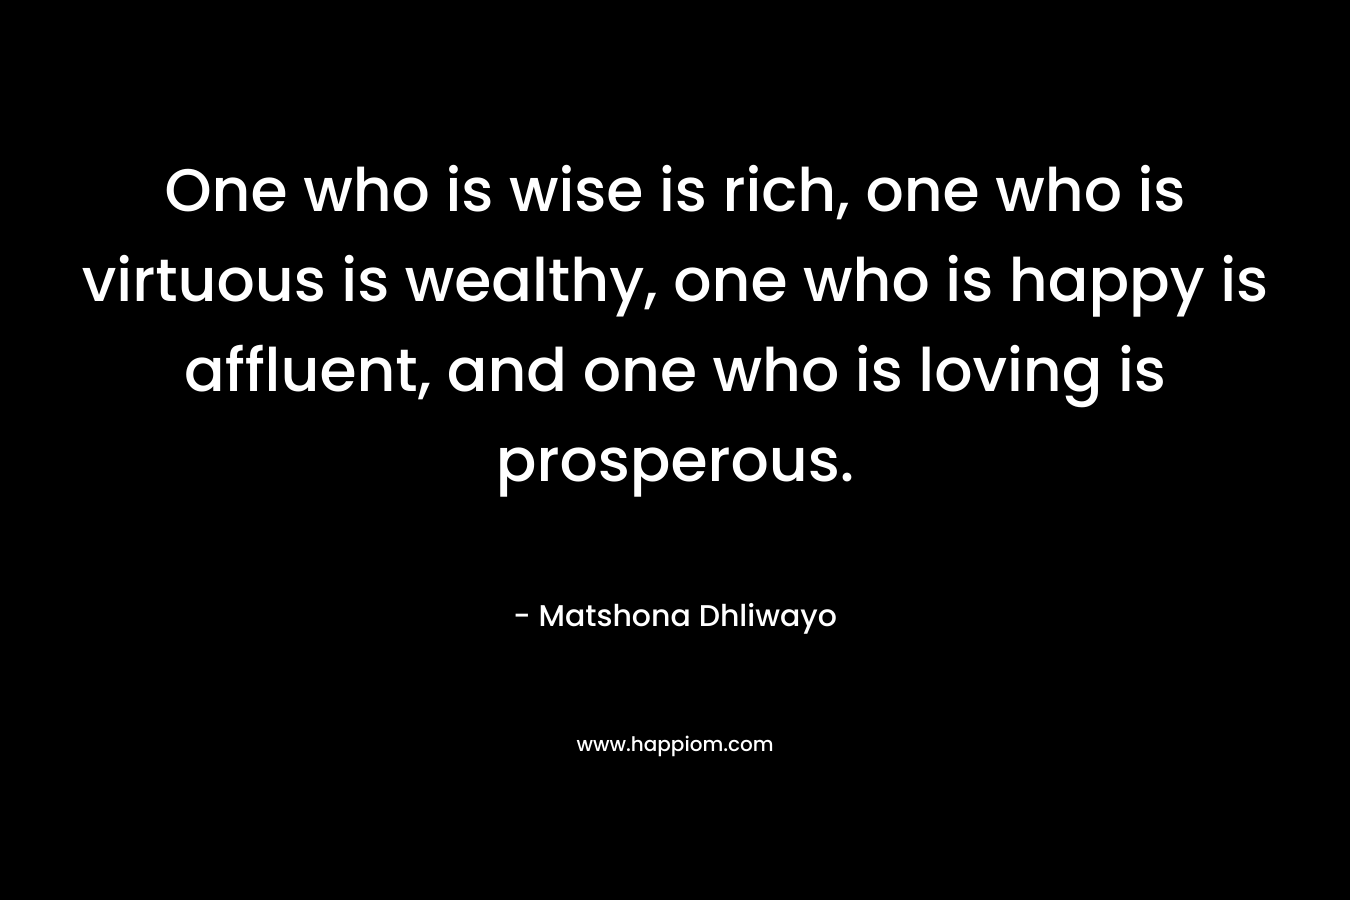 One who is wise is rich, one who is virtuous is wealthy, one who is happy is affluent, and one who is loving is prosperous.